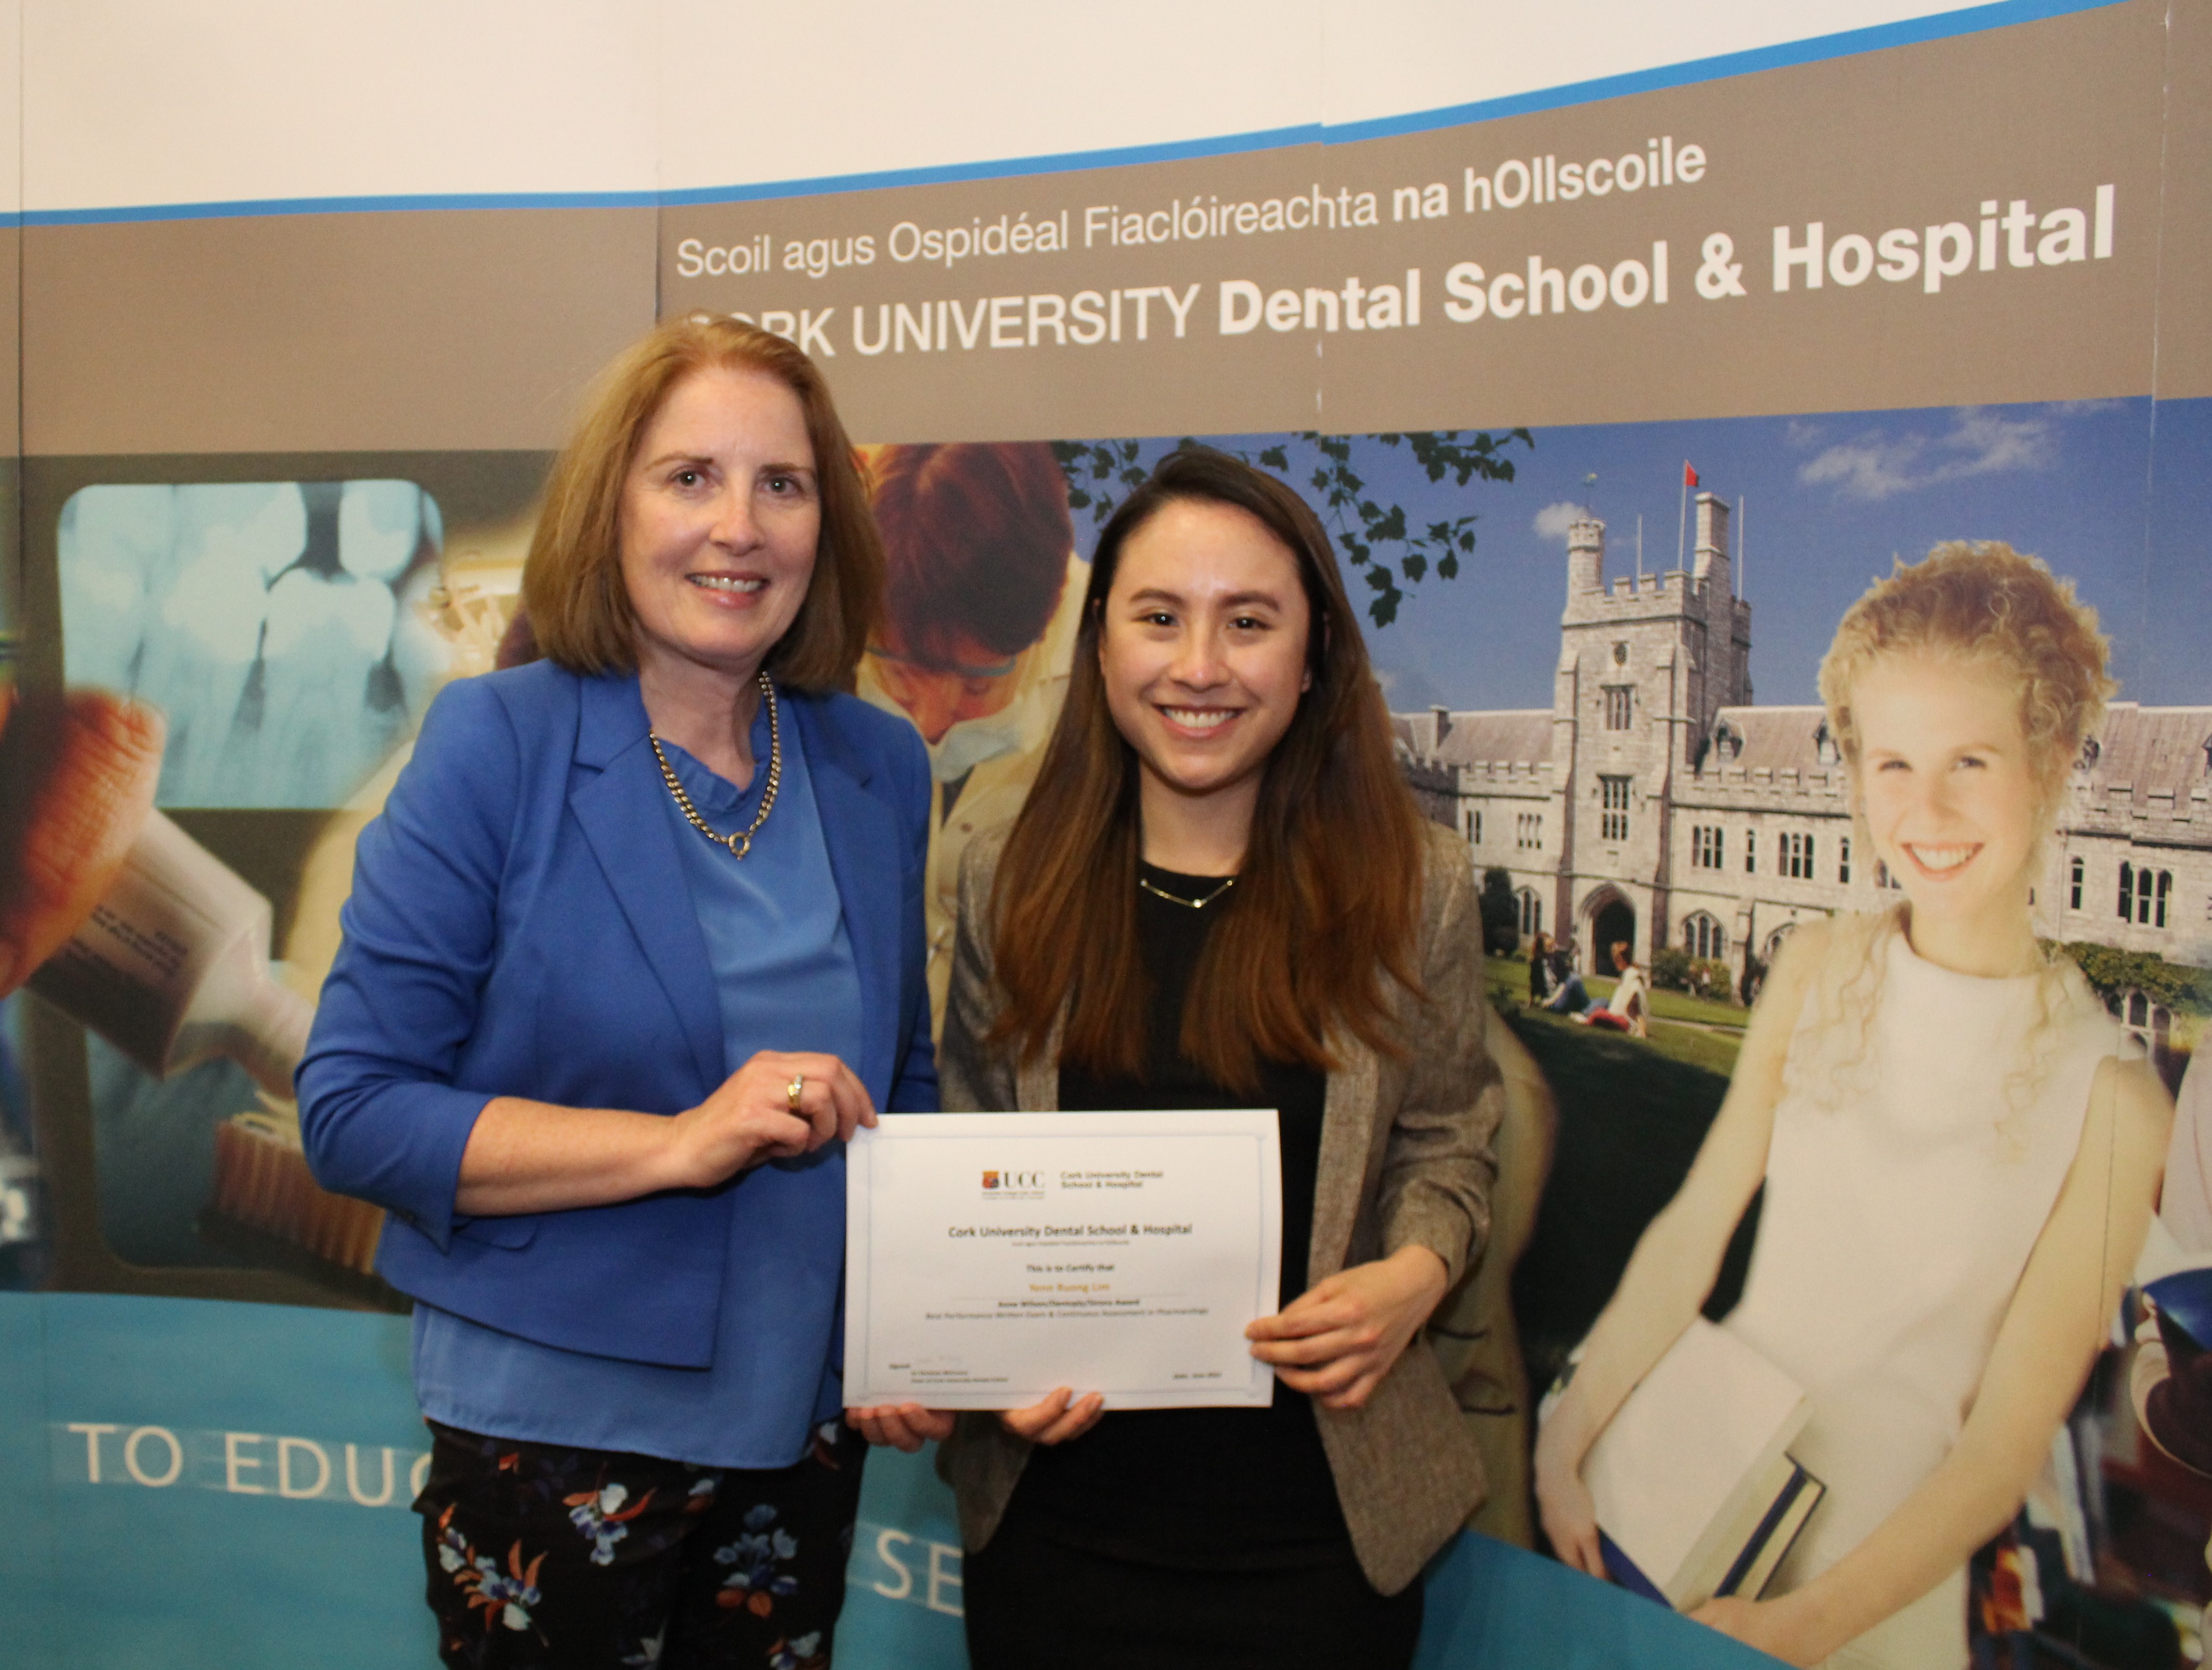 Congratulations to Yenn Ruong Lim on receiving the Dr Anne Wilson/DentsPly Sirona Prize in Dental Pharmacology